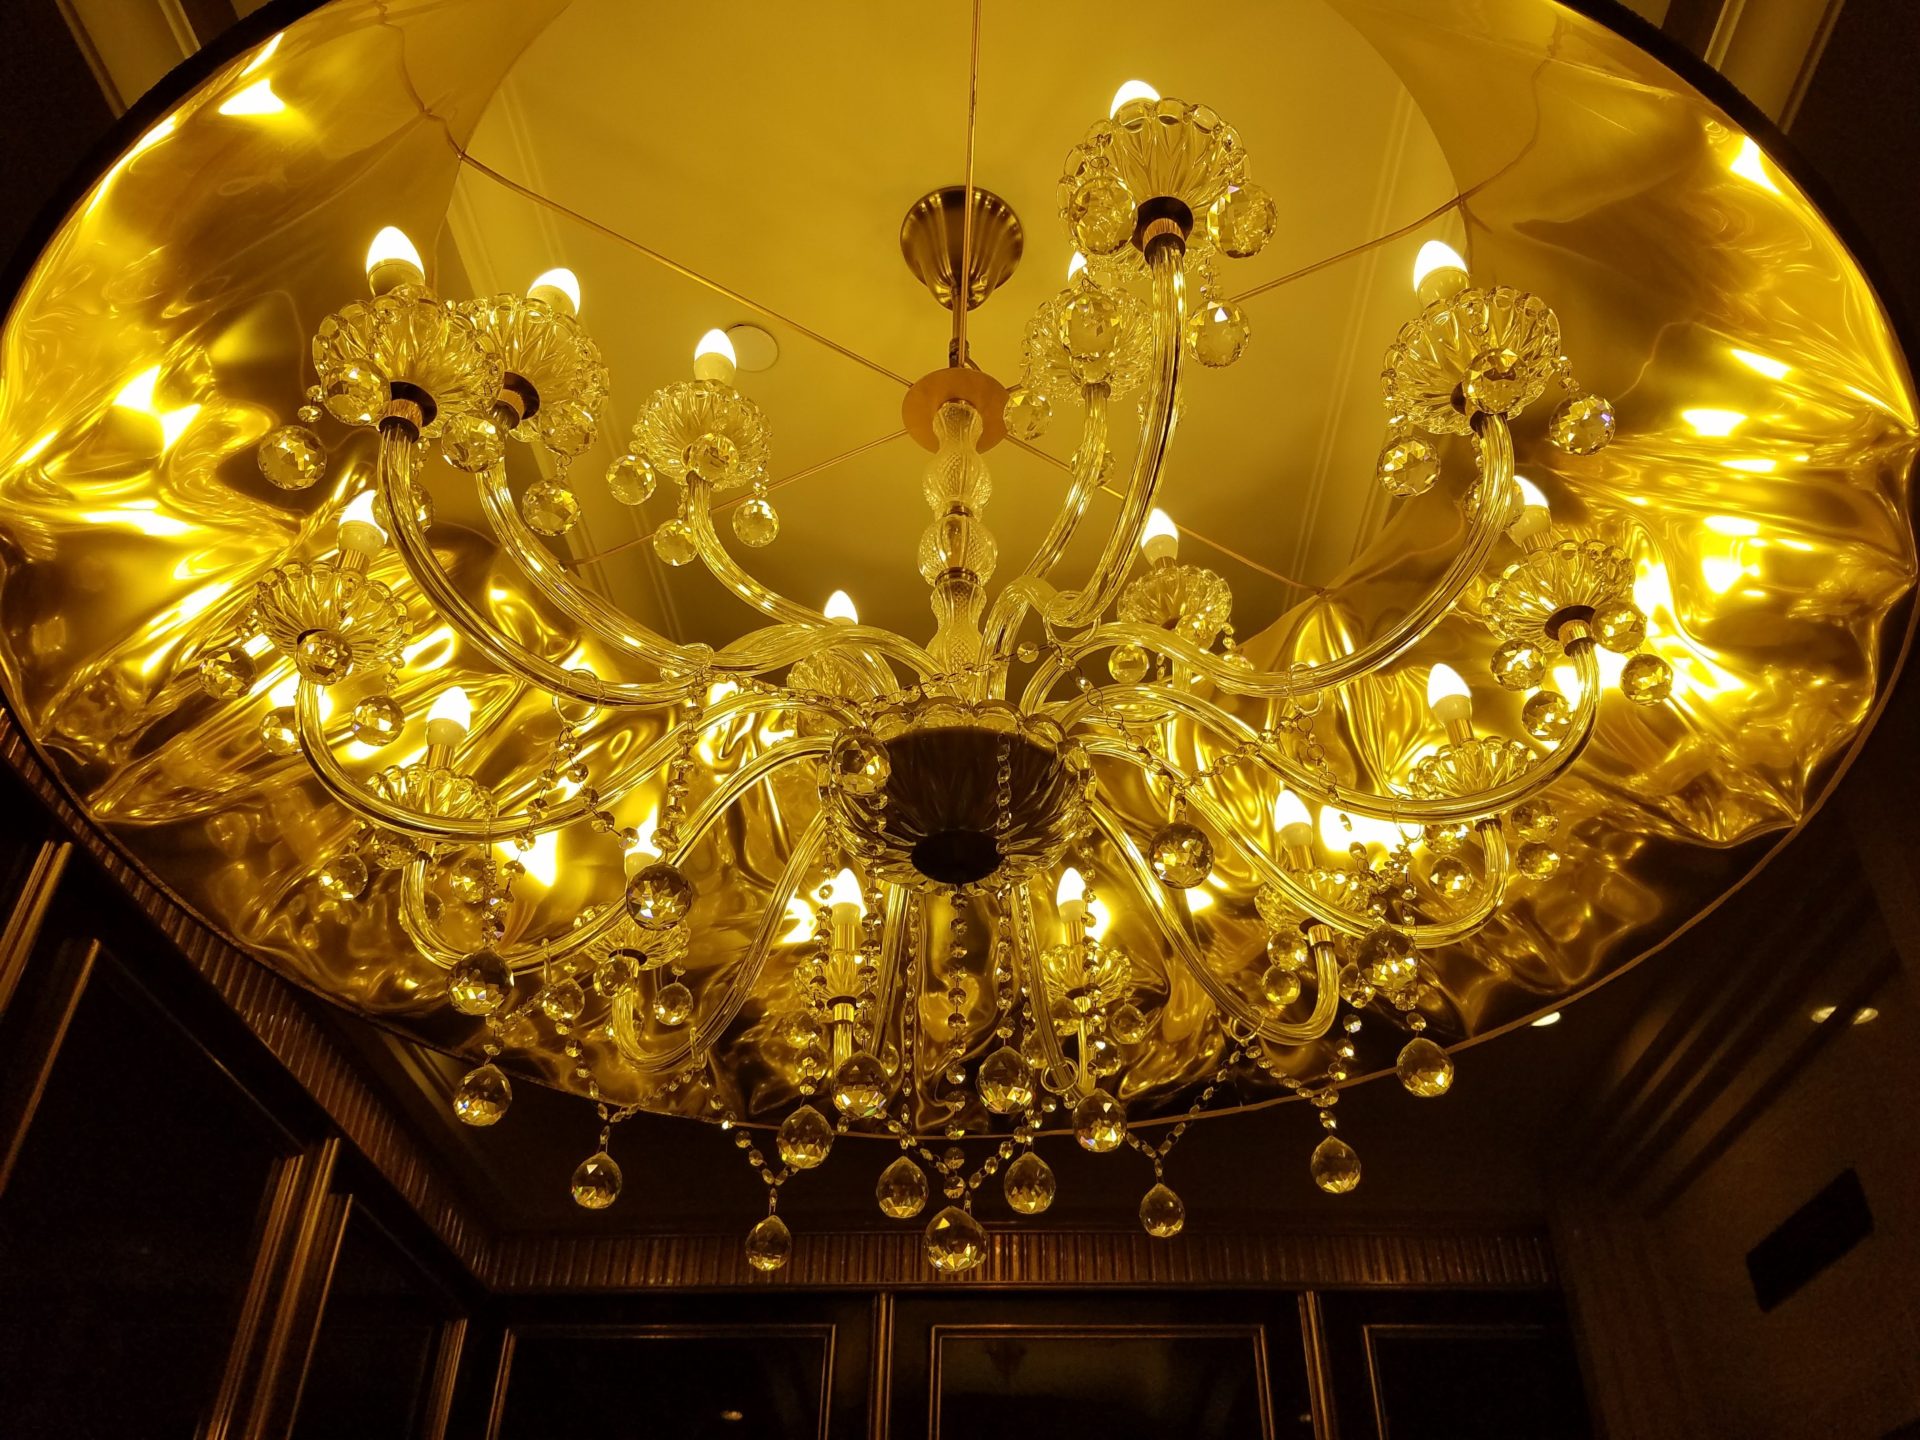 a chandelier with crystal lights from the ceiling